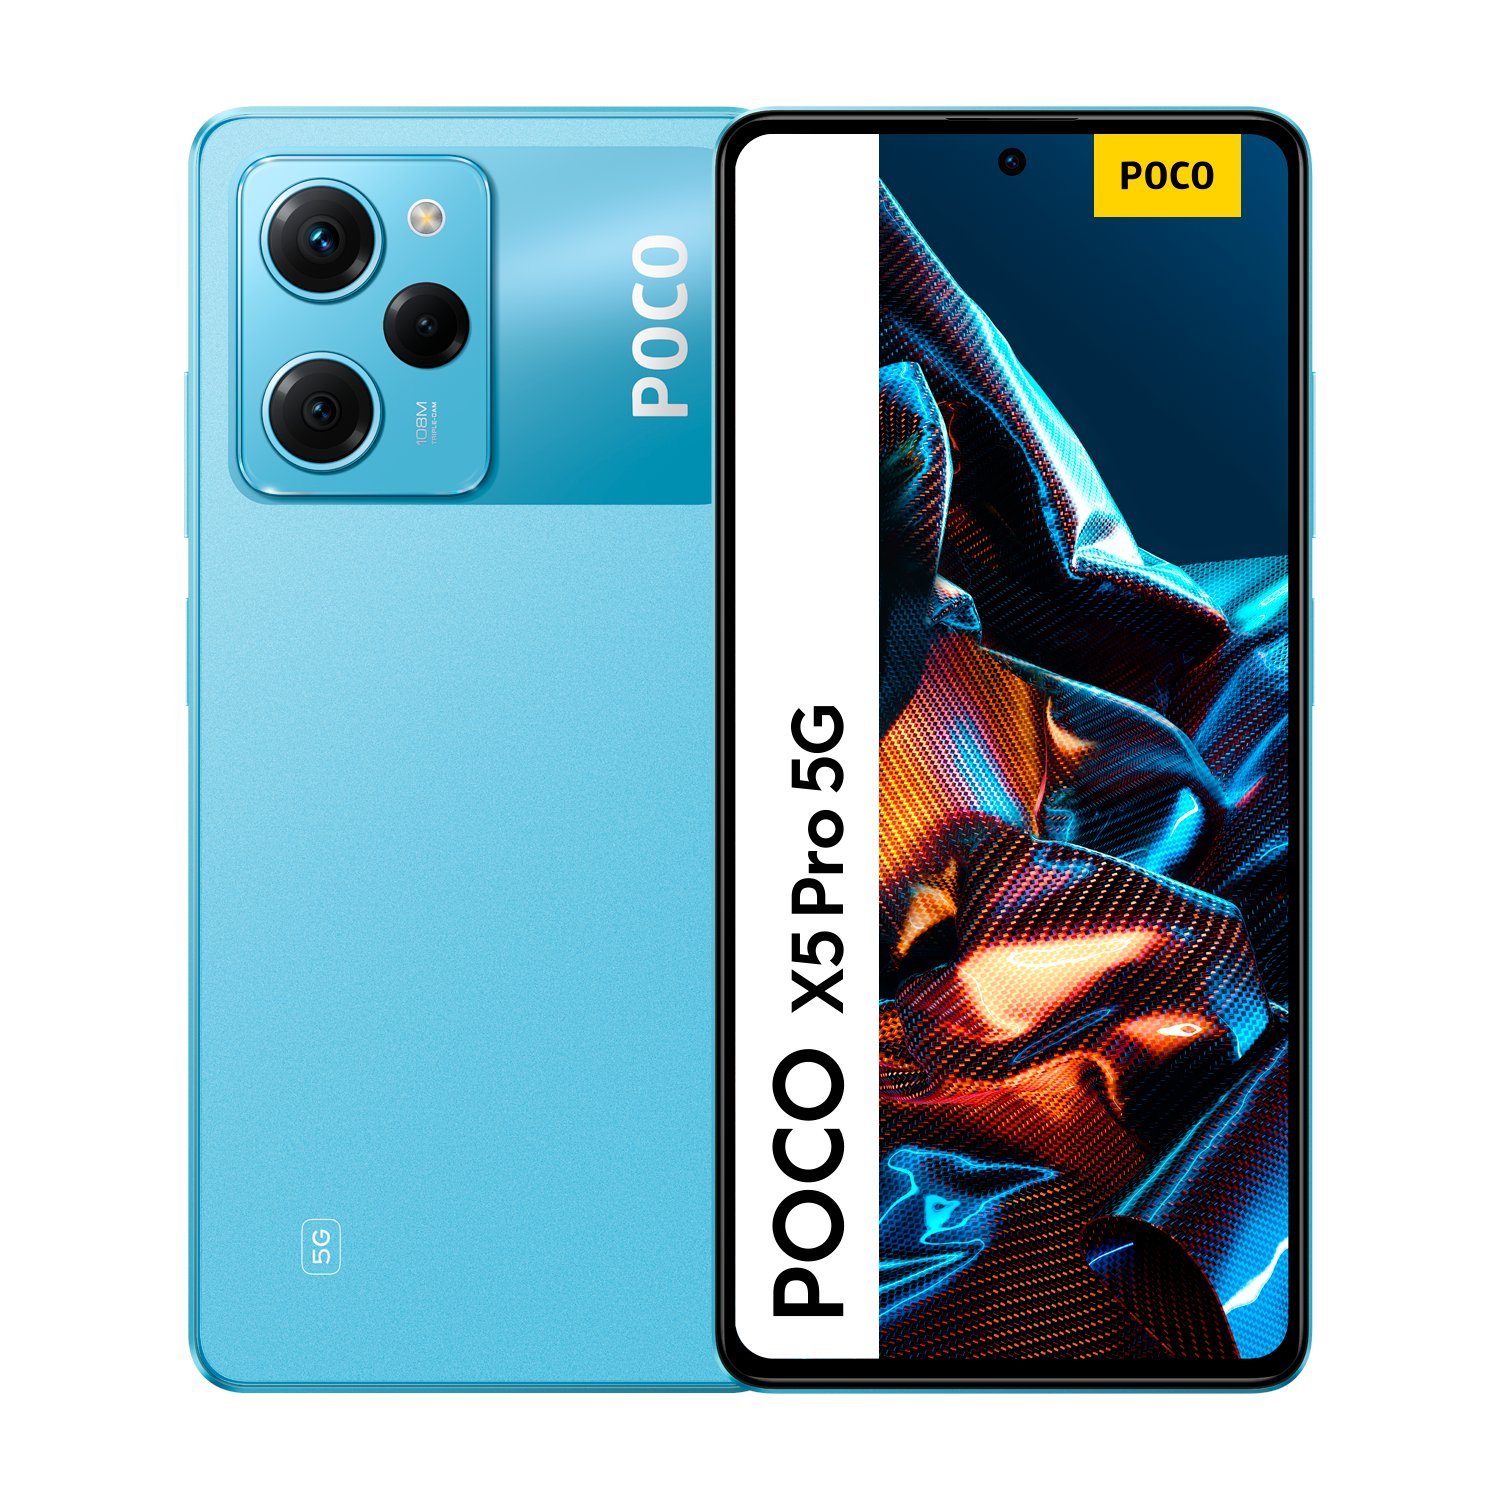 POCO X5 & X5 Pro appear in design render leaks, color options revealed -  Gizmochina